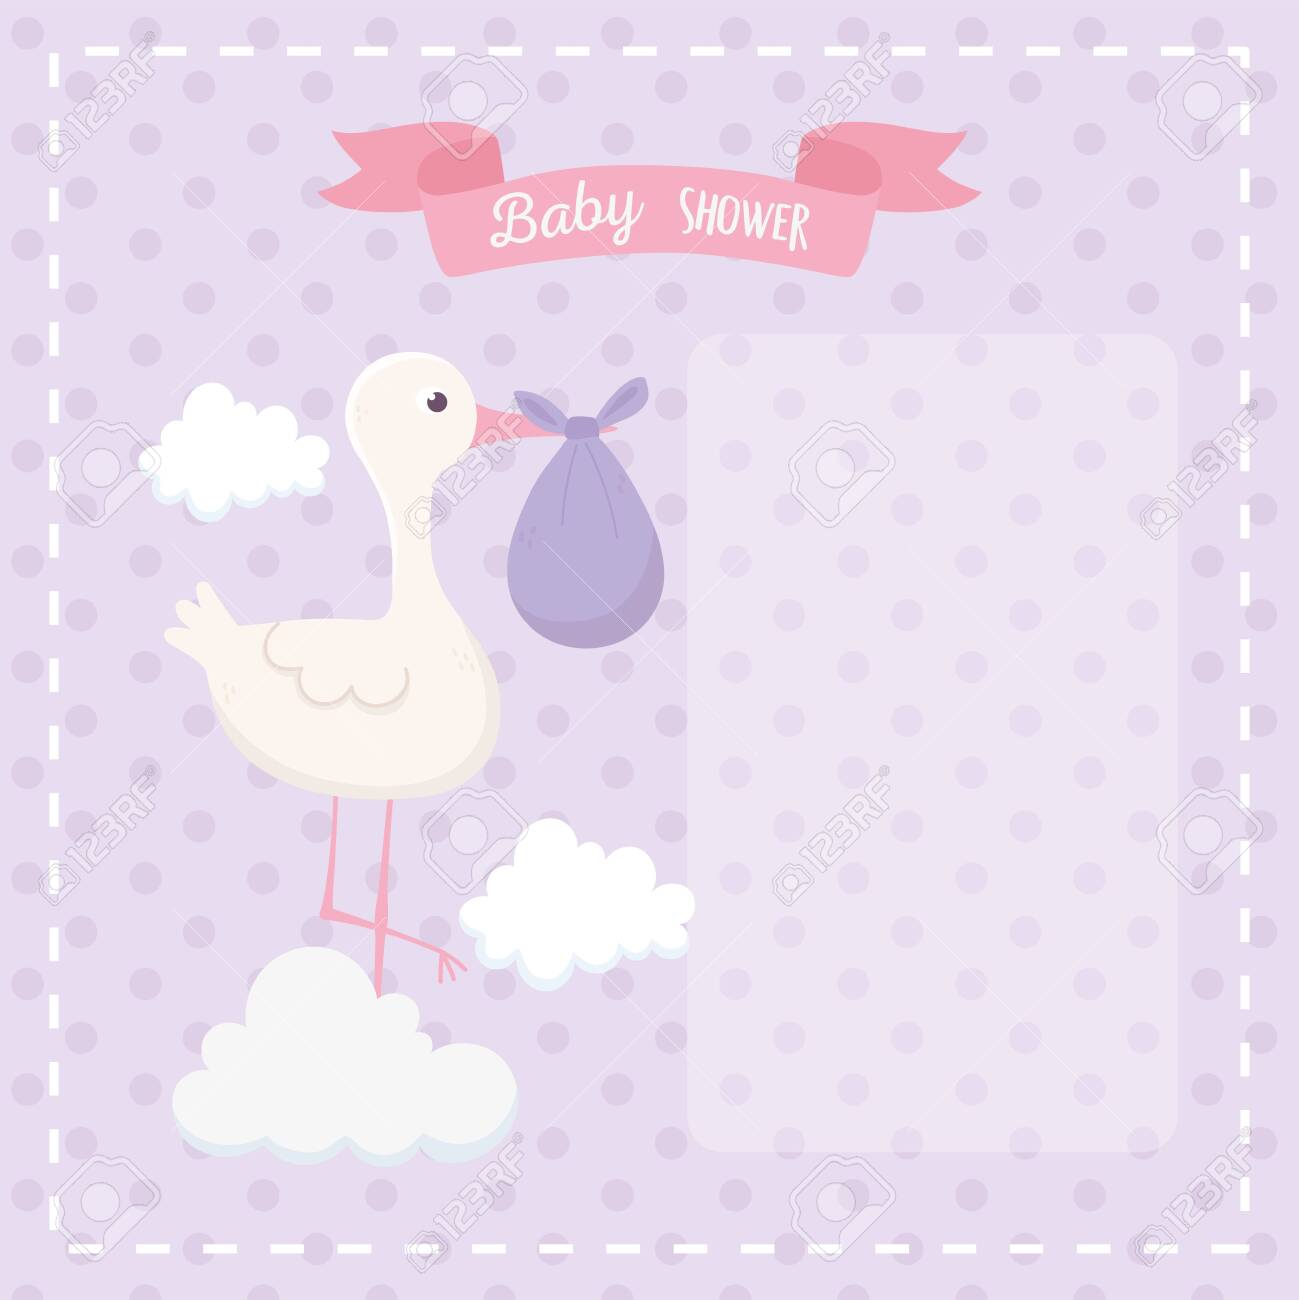 Baby Shower Stork With Purple Diaper On Clouds Dotted Background